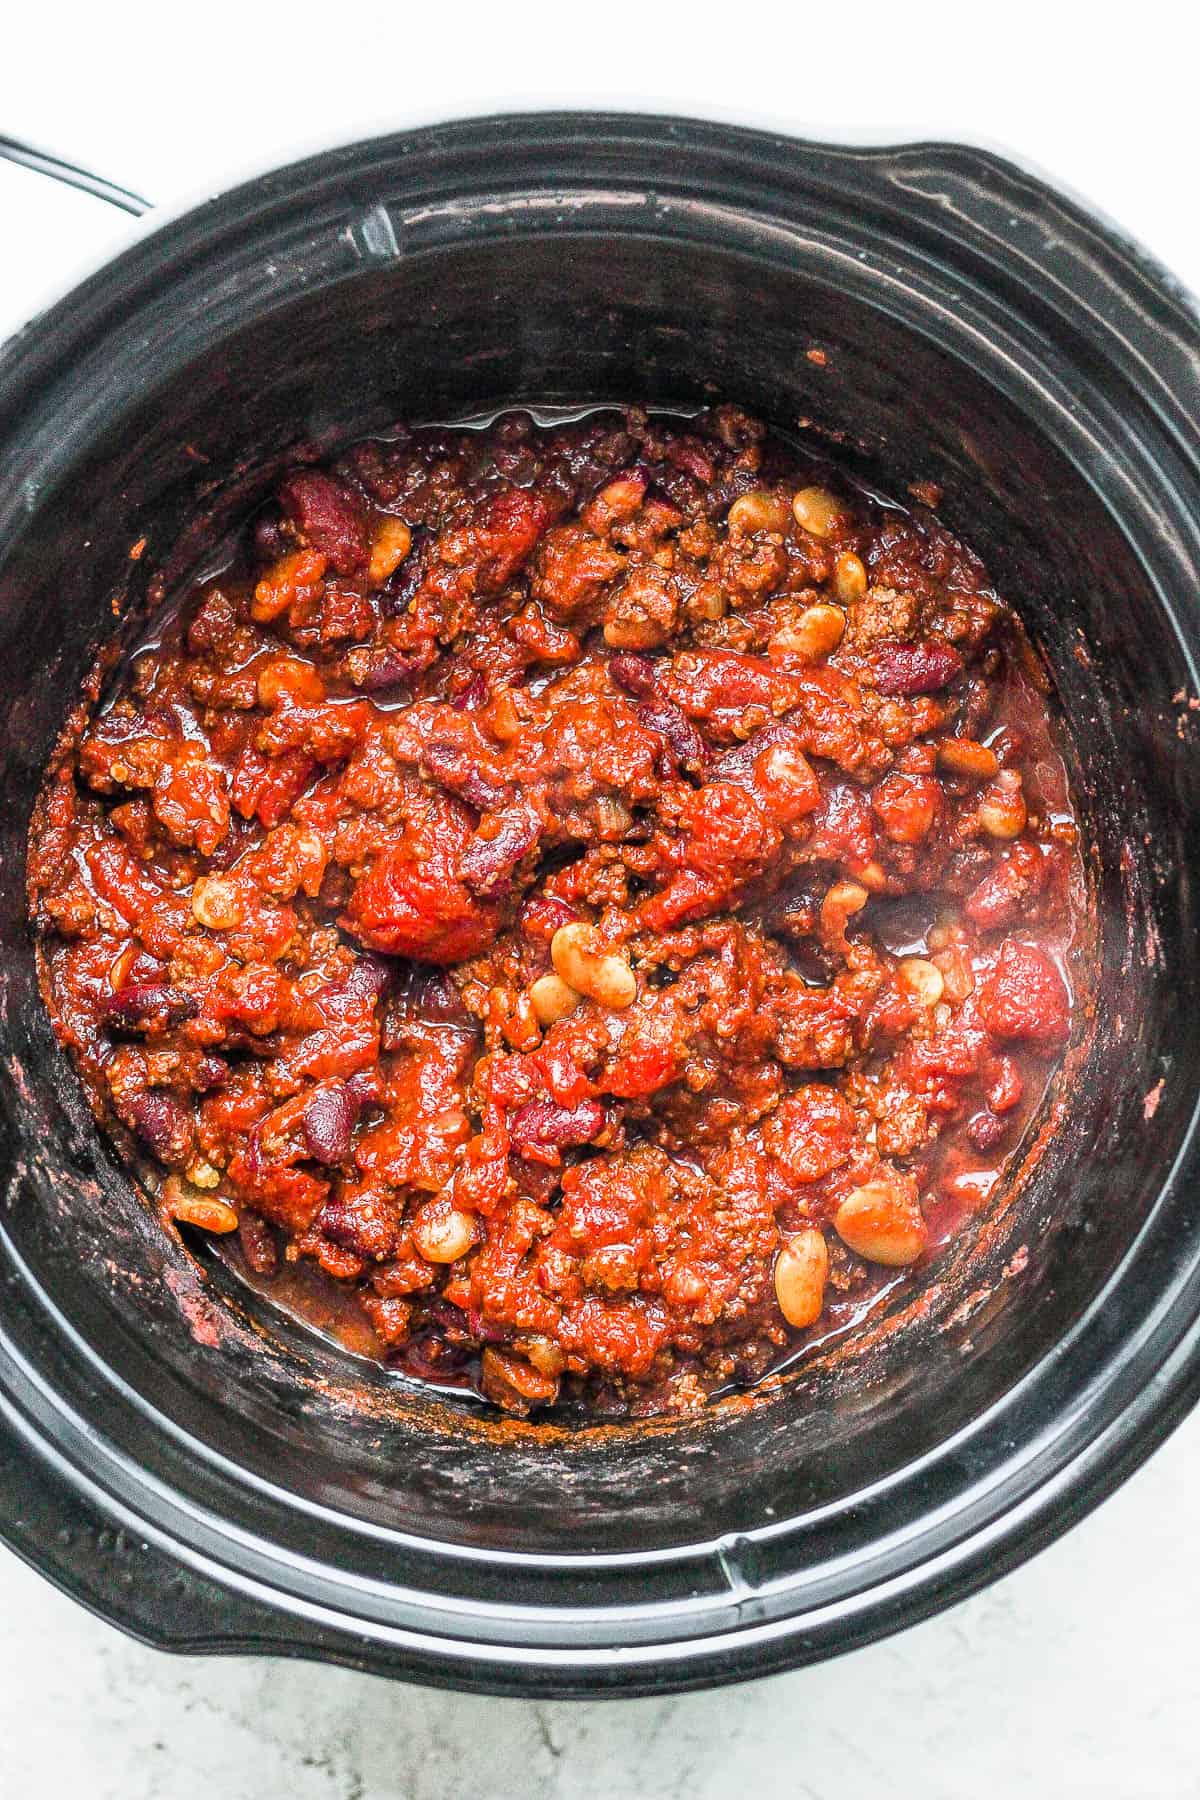 Slow cooker chili after cooking on low for 6-8 hours.